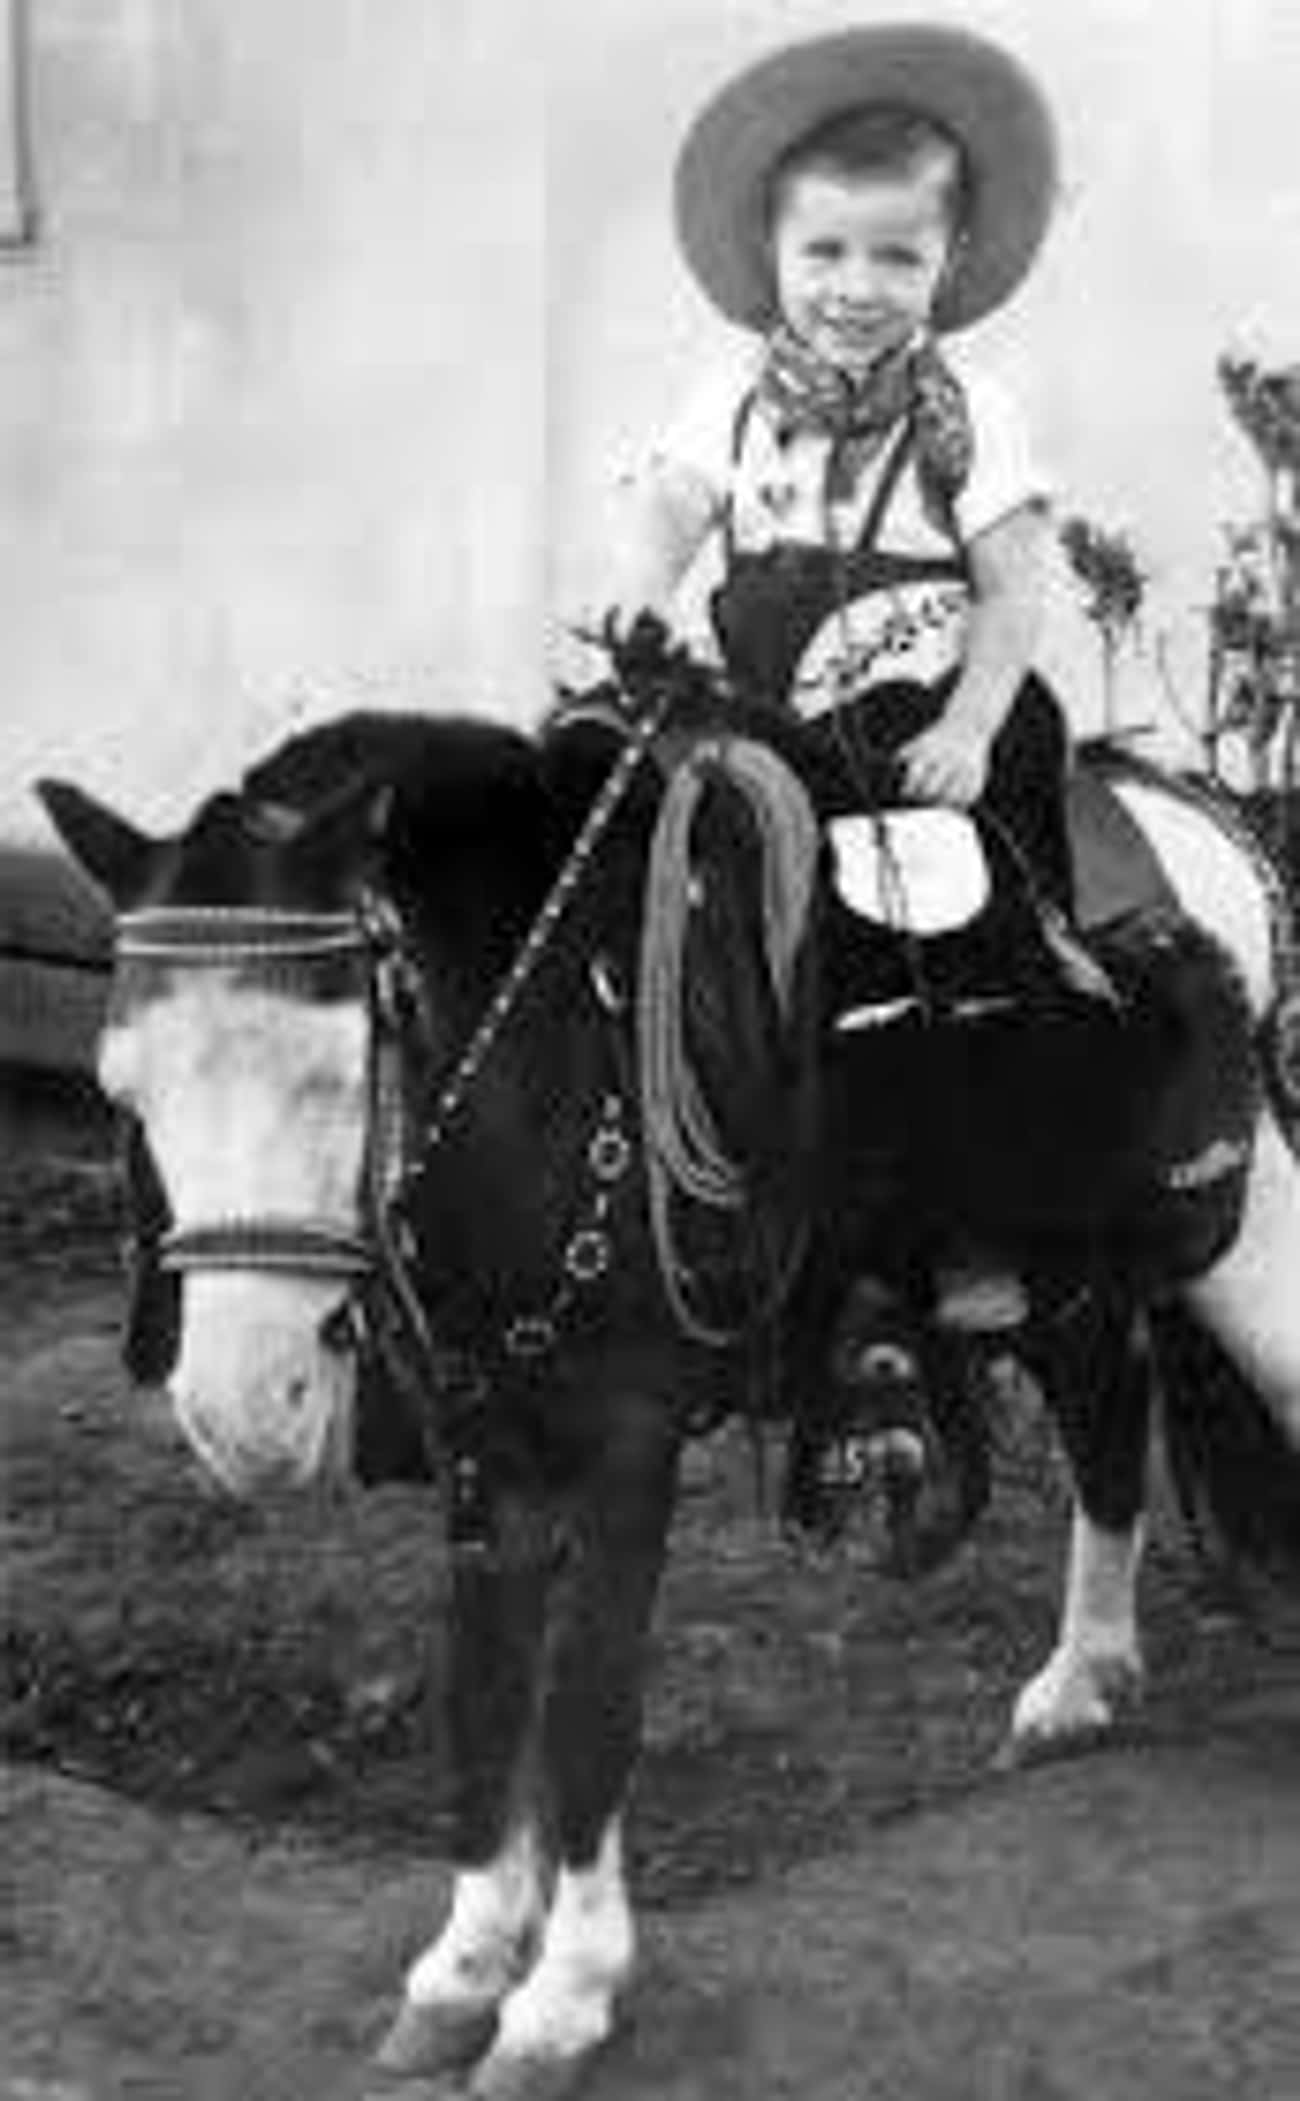 Young Chuck Norris Riding Horse as Baby